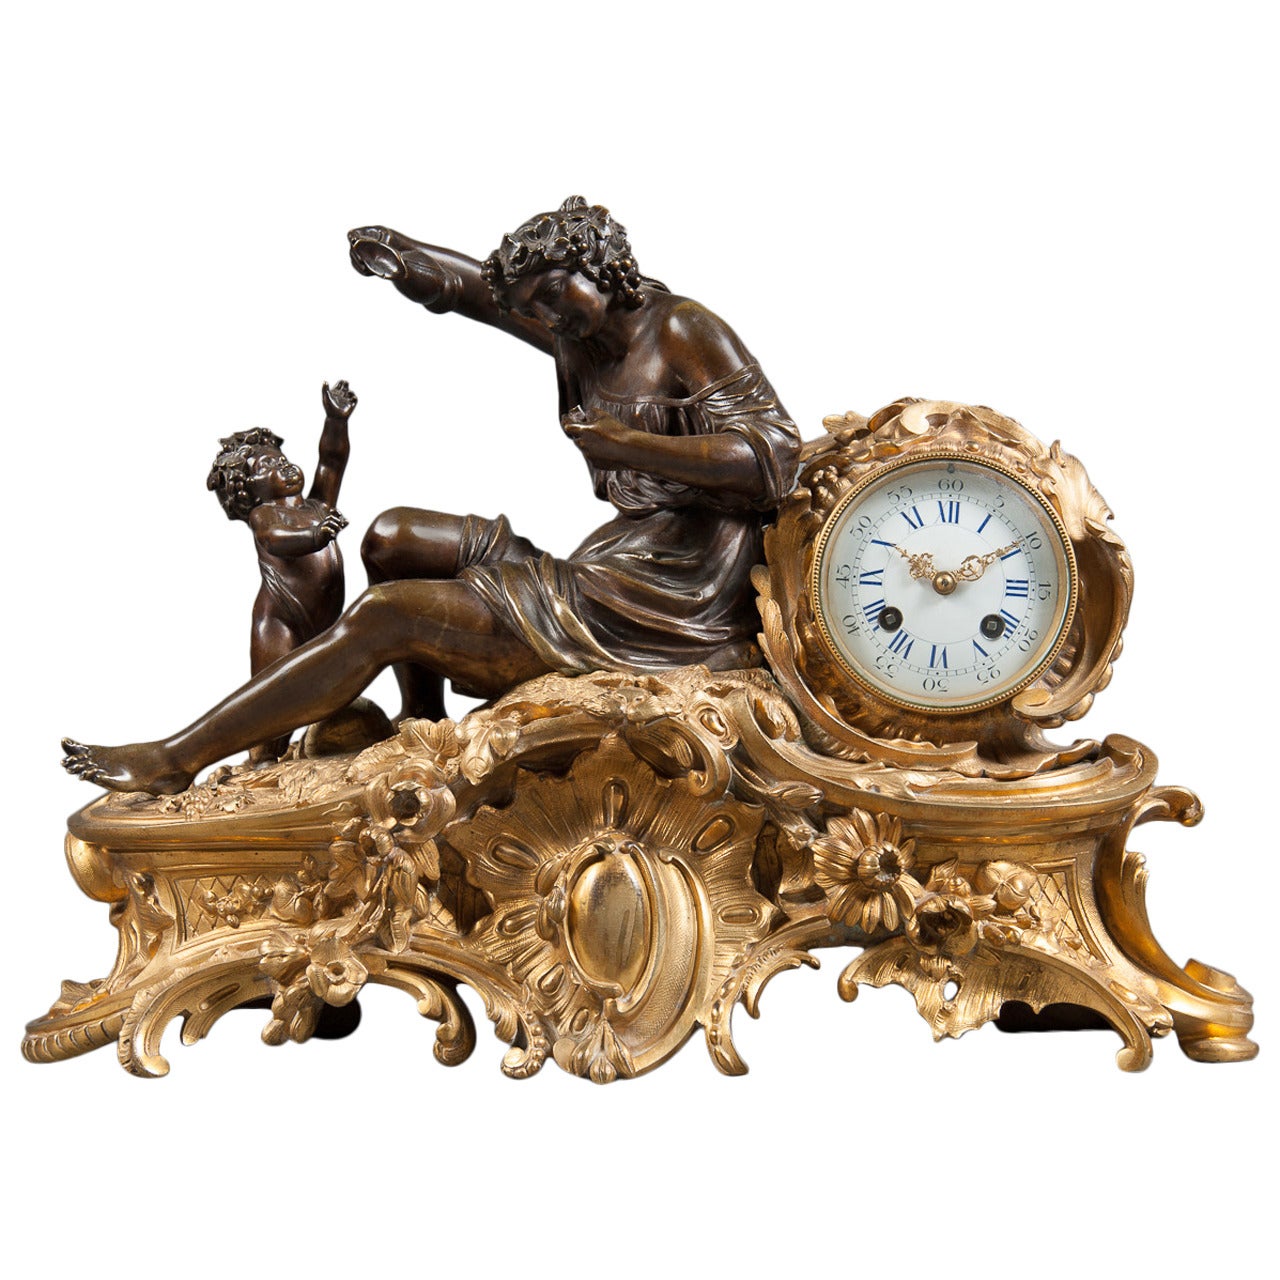 A Late 19th Century French Gilt and Patinated Bronze Figural Mantle Clock